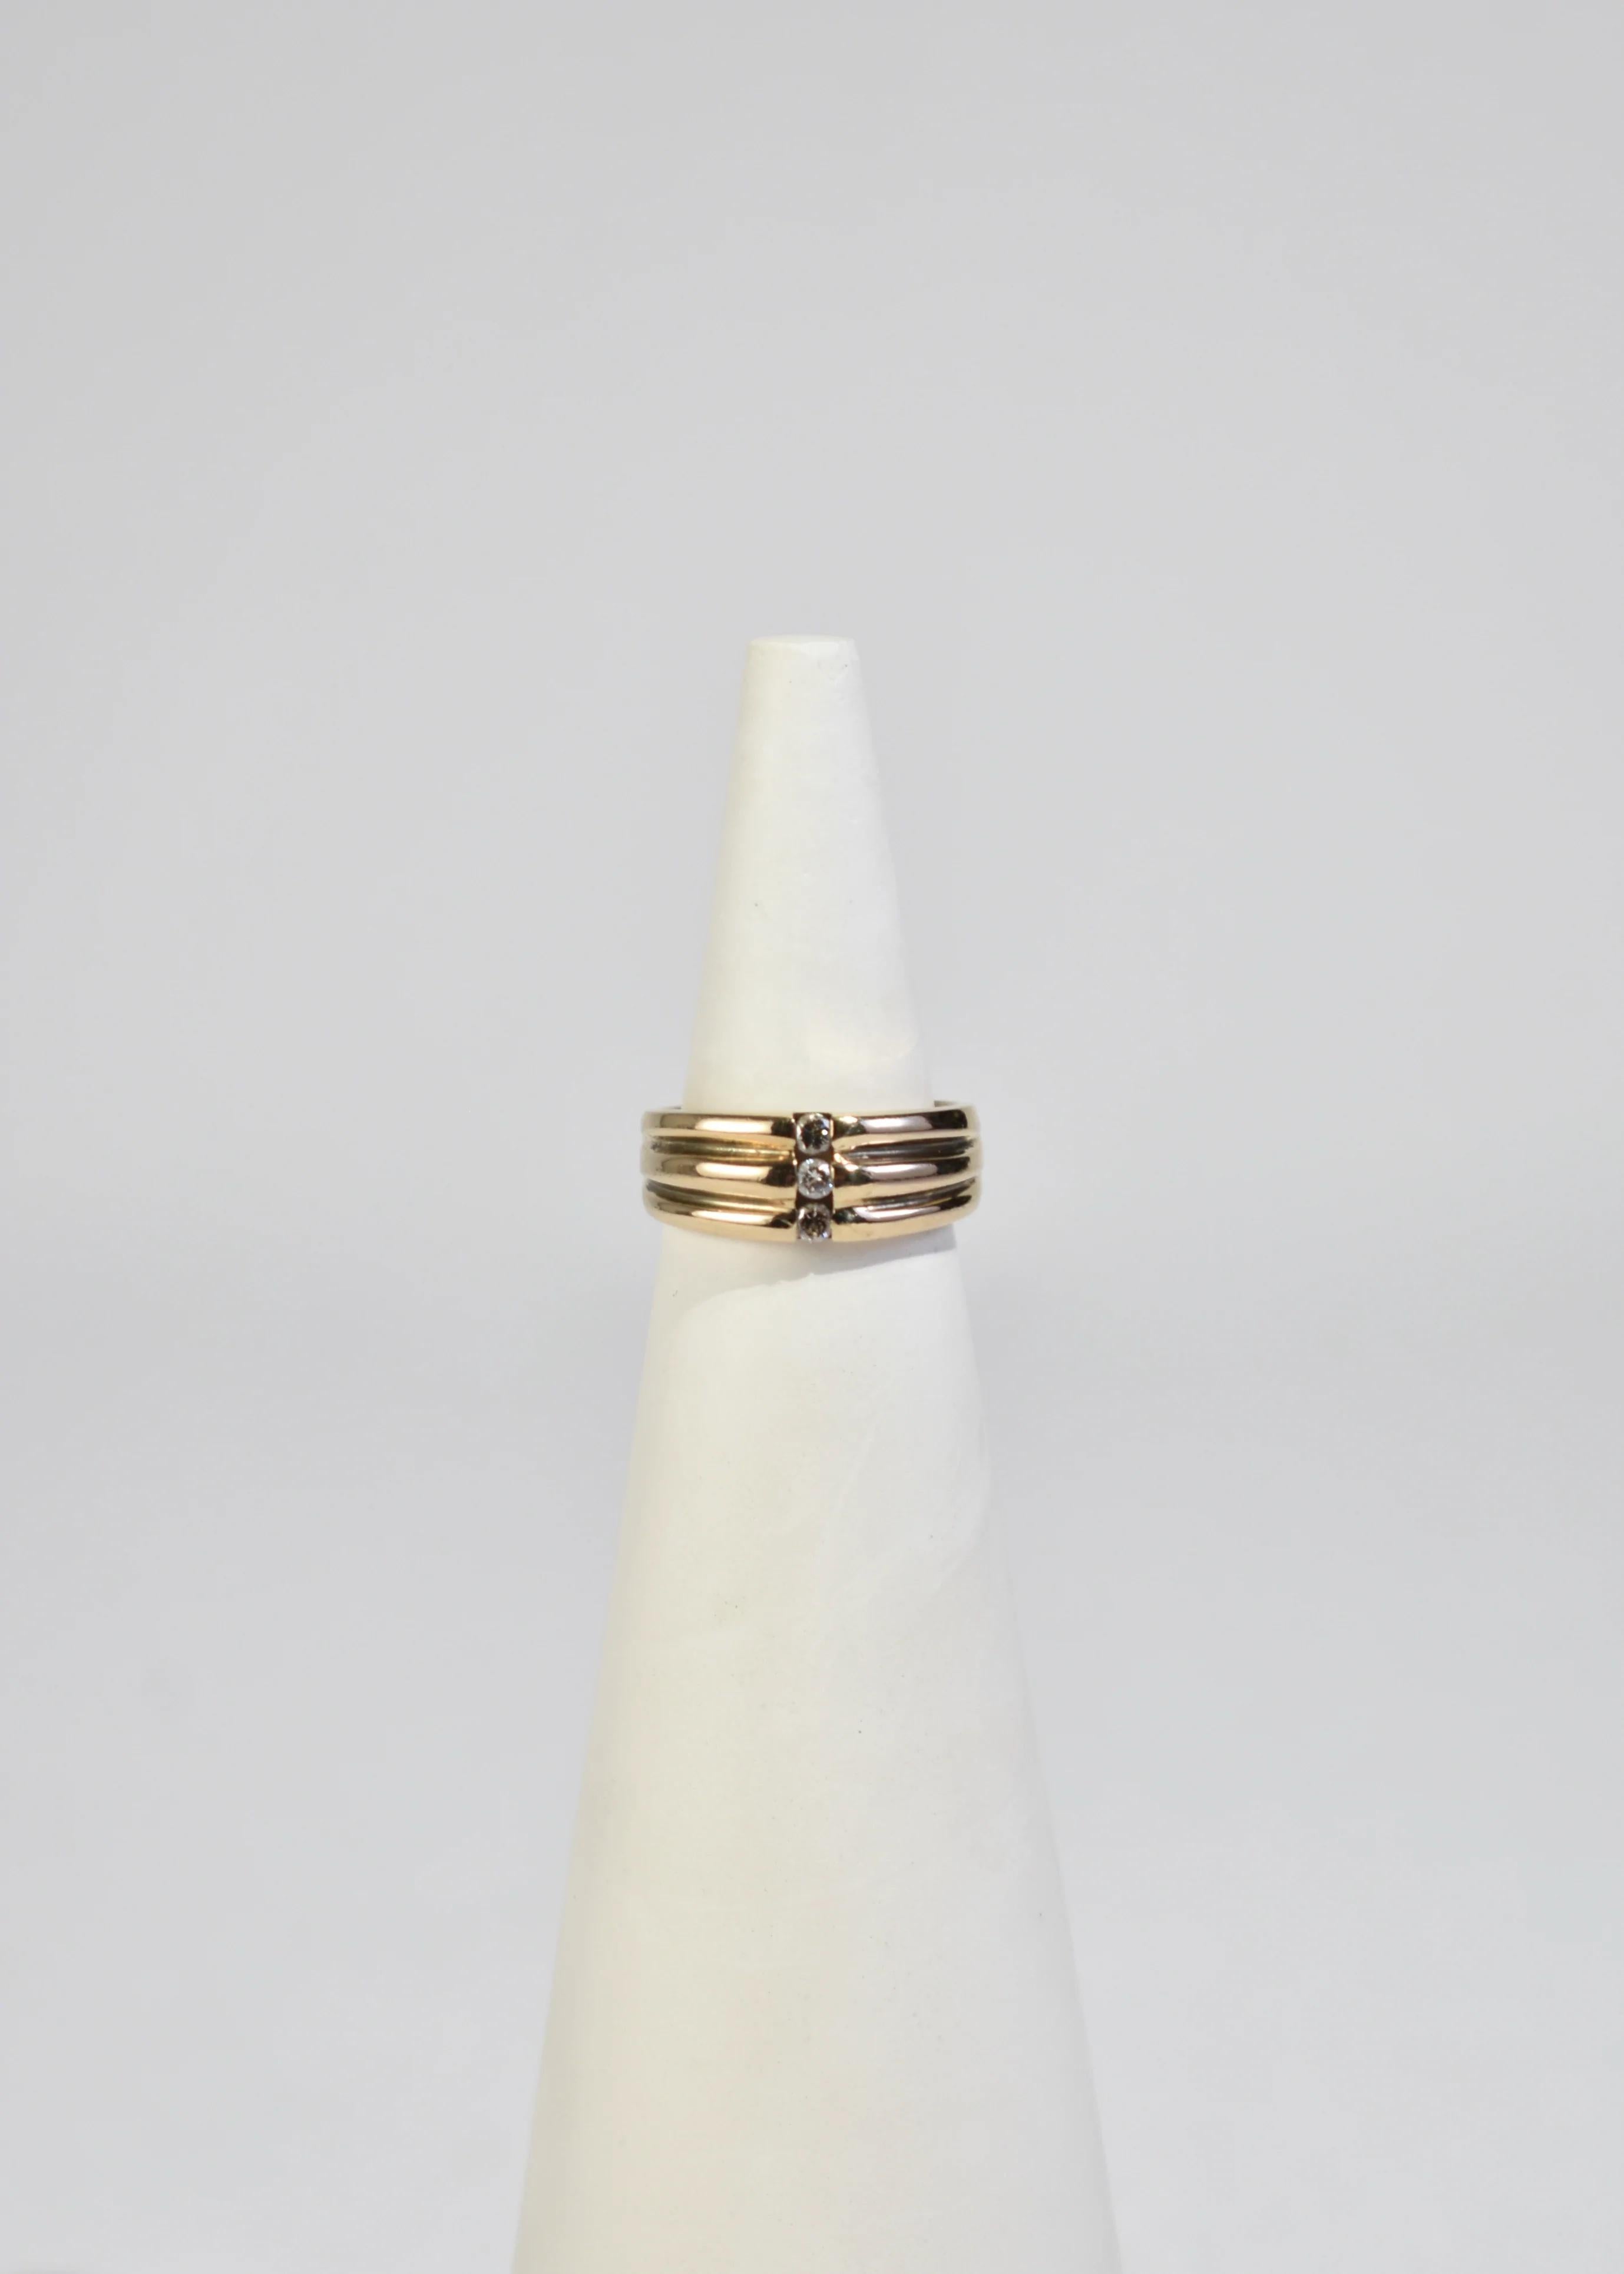 Stunning vintage gold ring with ribbed detail and three diamonds. Stamped 14k.

Material: 14k gold, diamond.

Size: 7.5